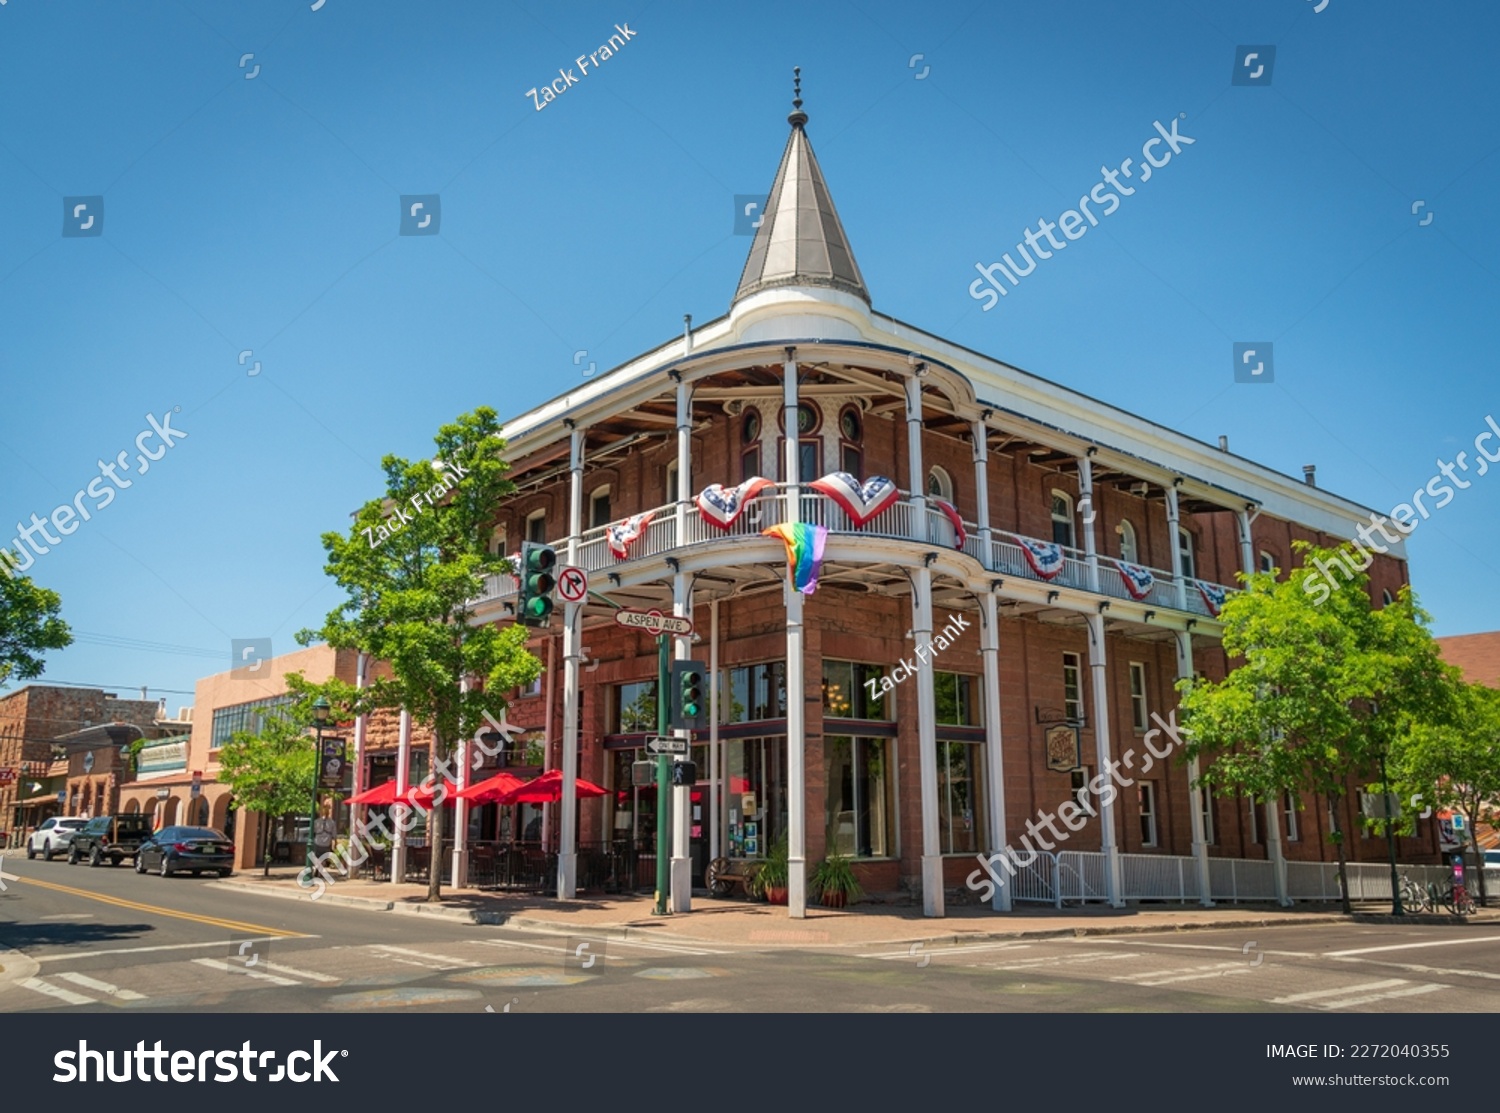 Festive building at Flagstaff, Arizona with American and LGBT flags. #2272040355